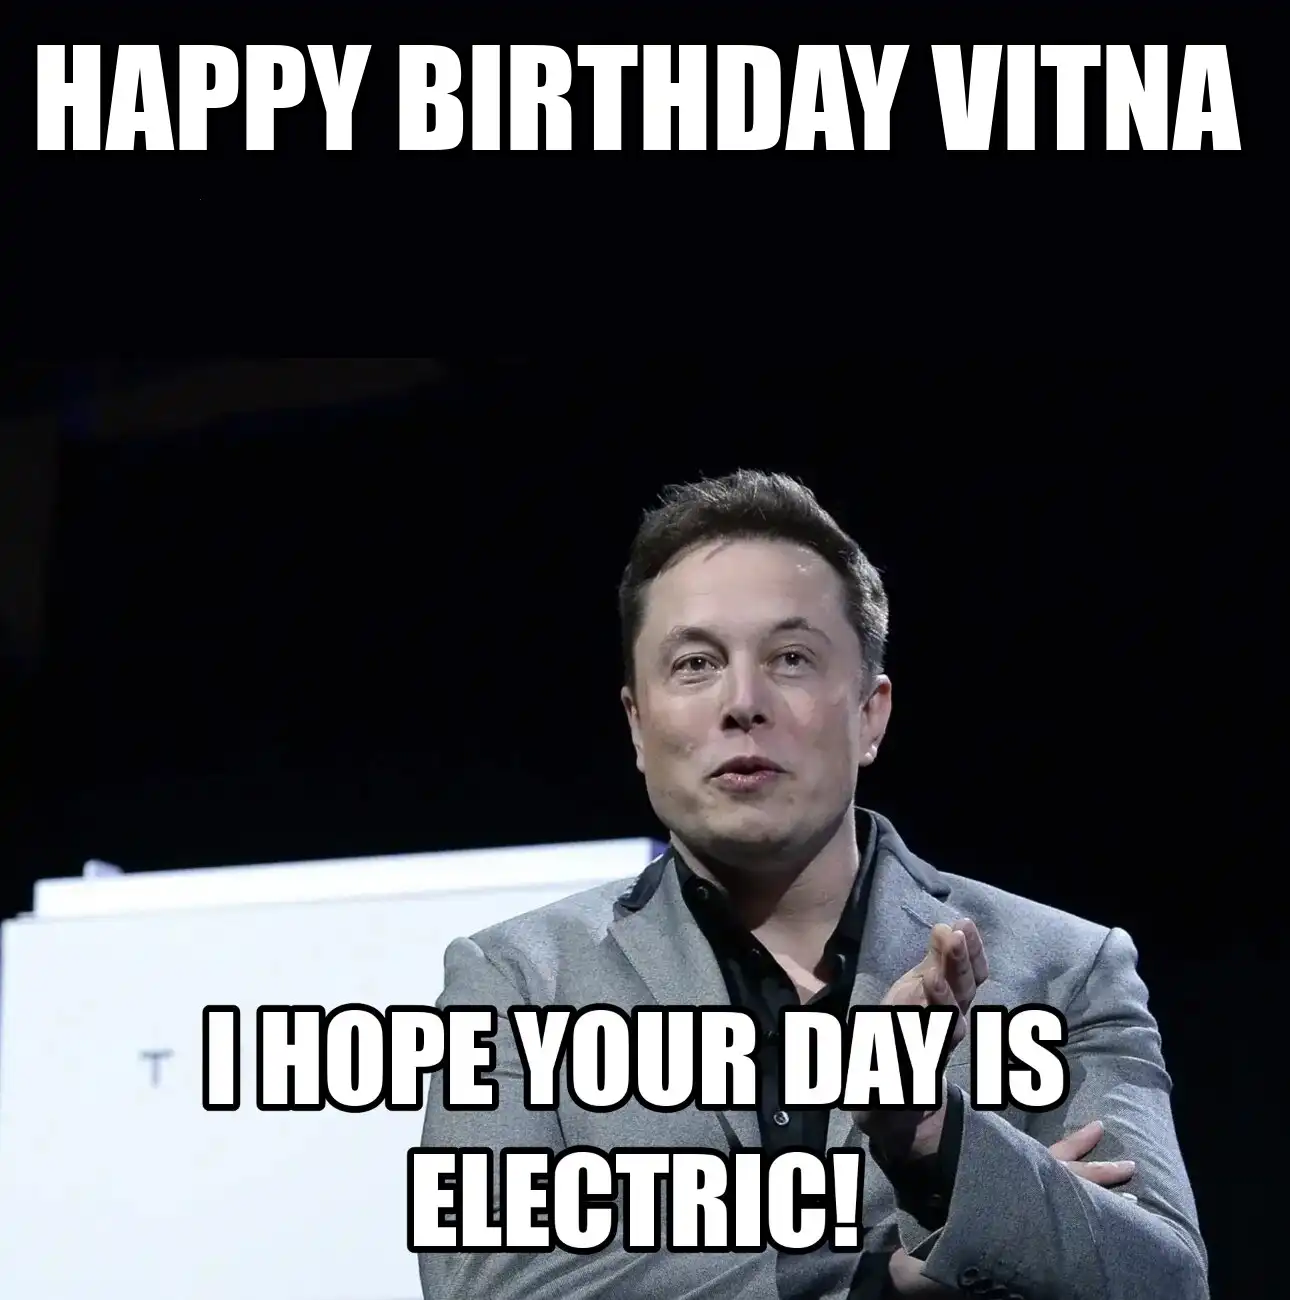 Happy Birthday Vitna I Hope Your Day Is Electric Meme